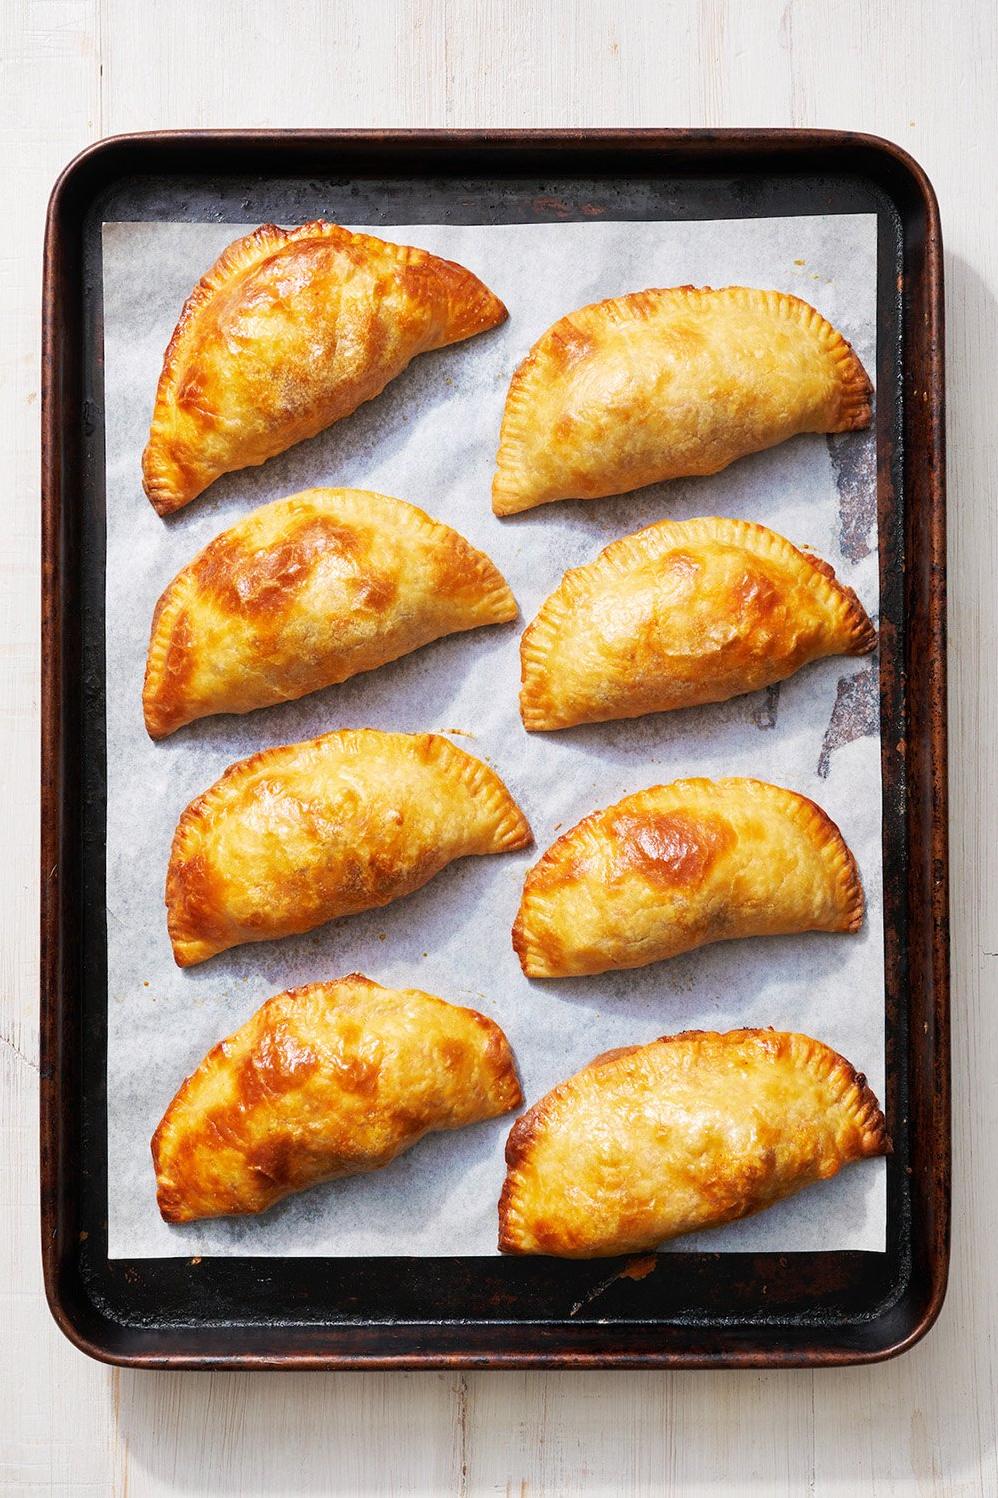  These empanadas are a Mexican breakfast dish, but with a Brazilian twist.